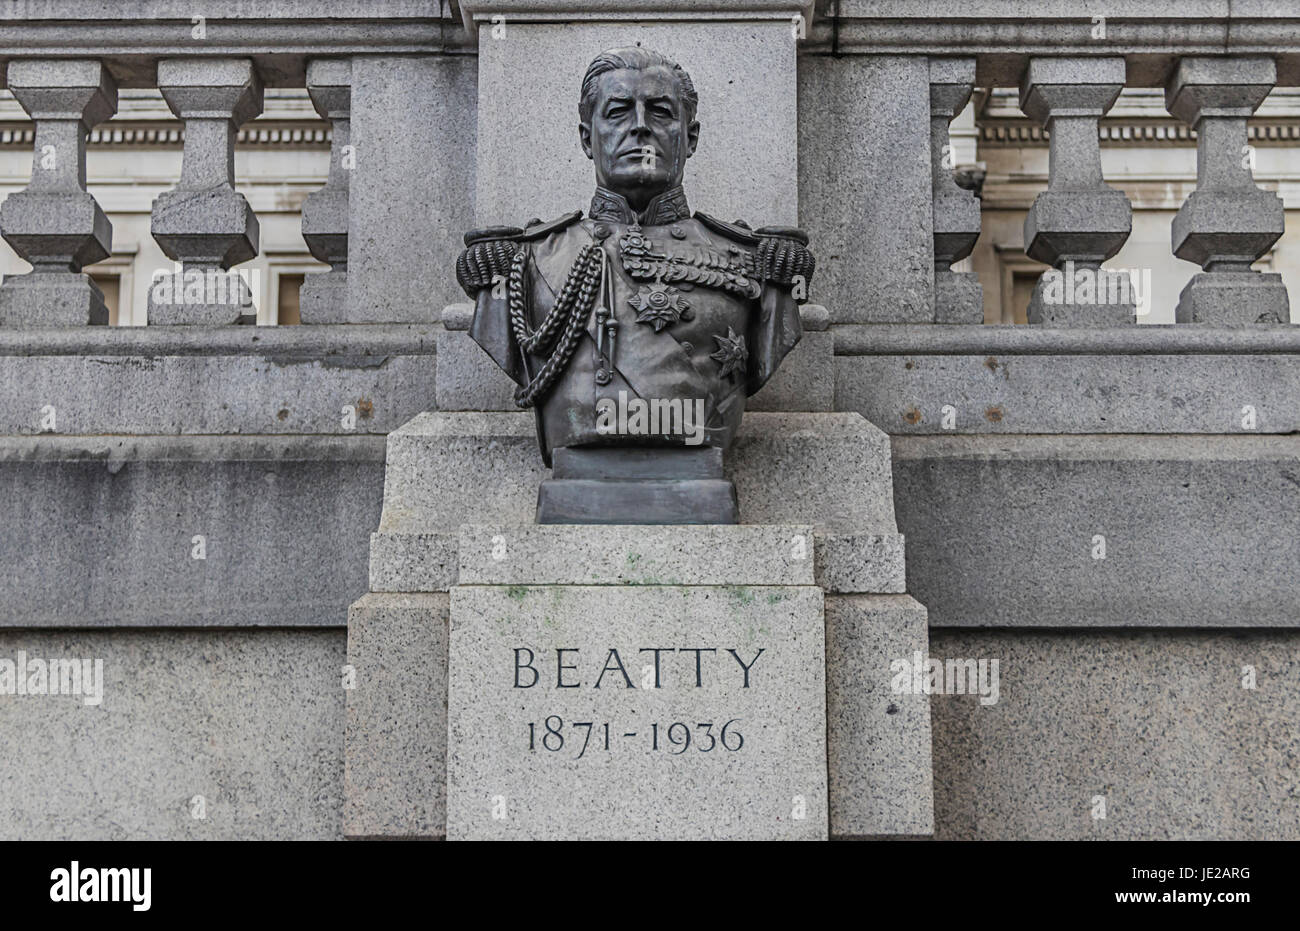 Statue of David Beatty, 1st Earl Beatty. Admiral of the Fleet David Richard Beatty, 1st Earl Beatty GCB, OM, GCVO, DSO, PC was a Royal Navy officer. Stock Photo